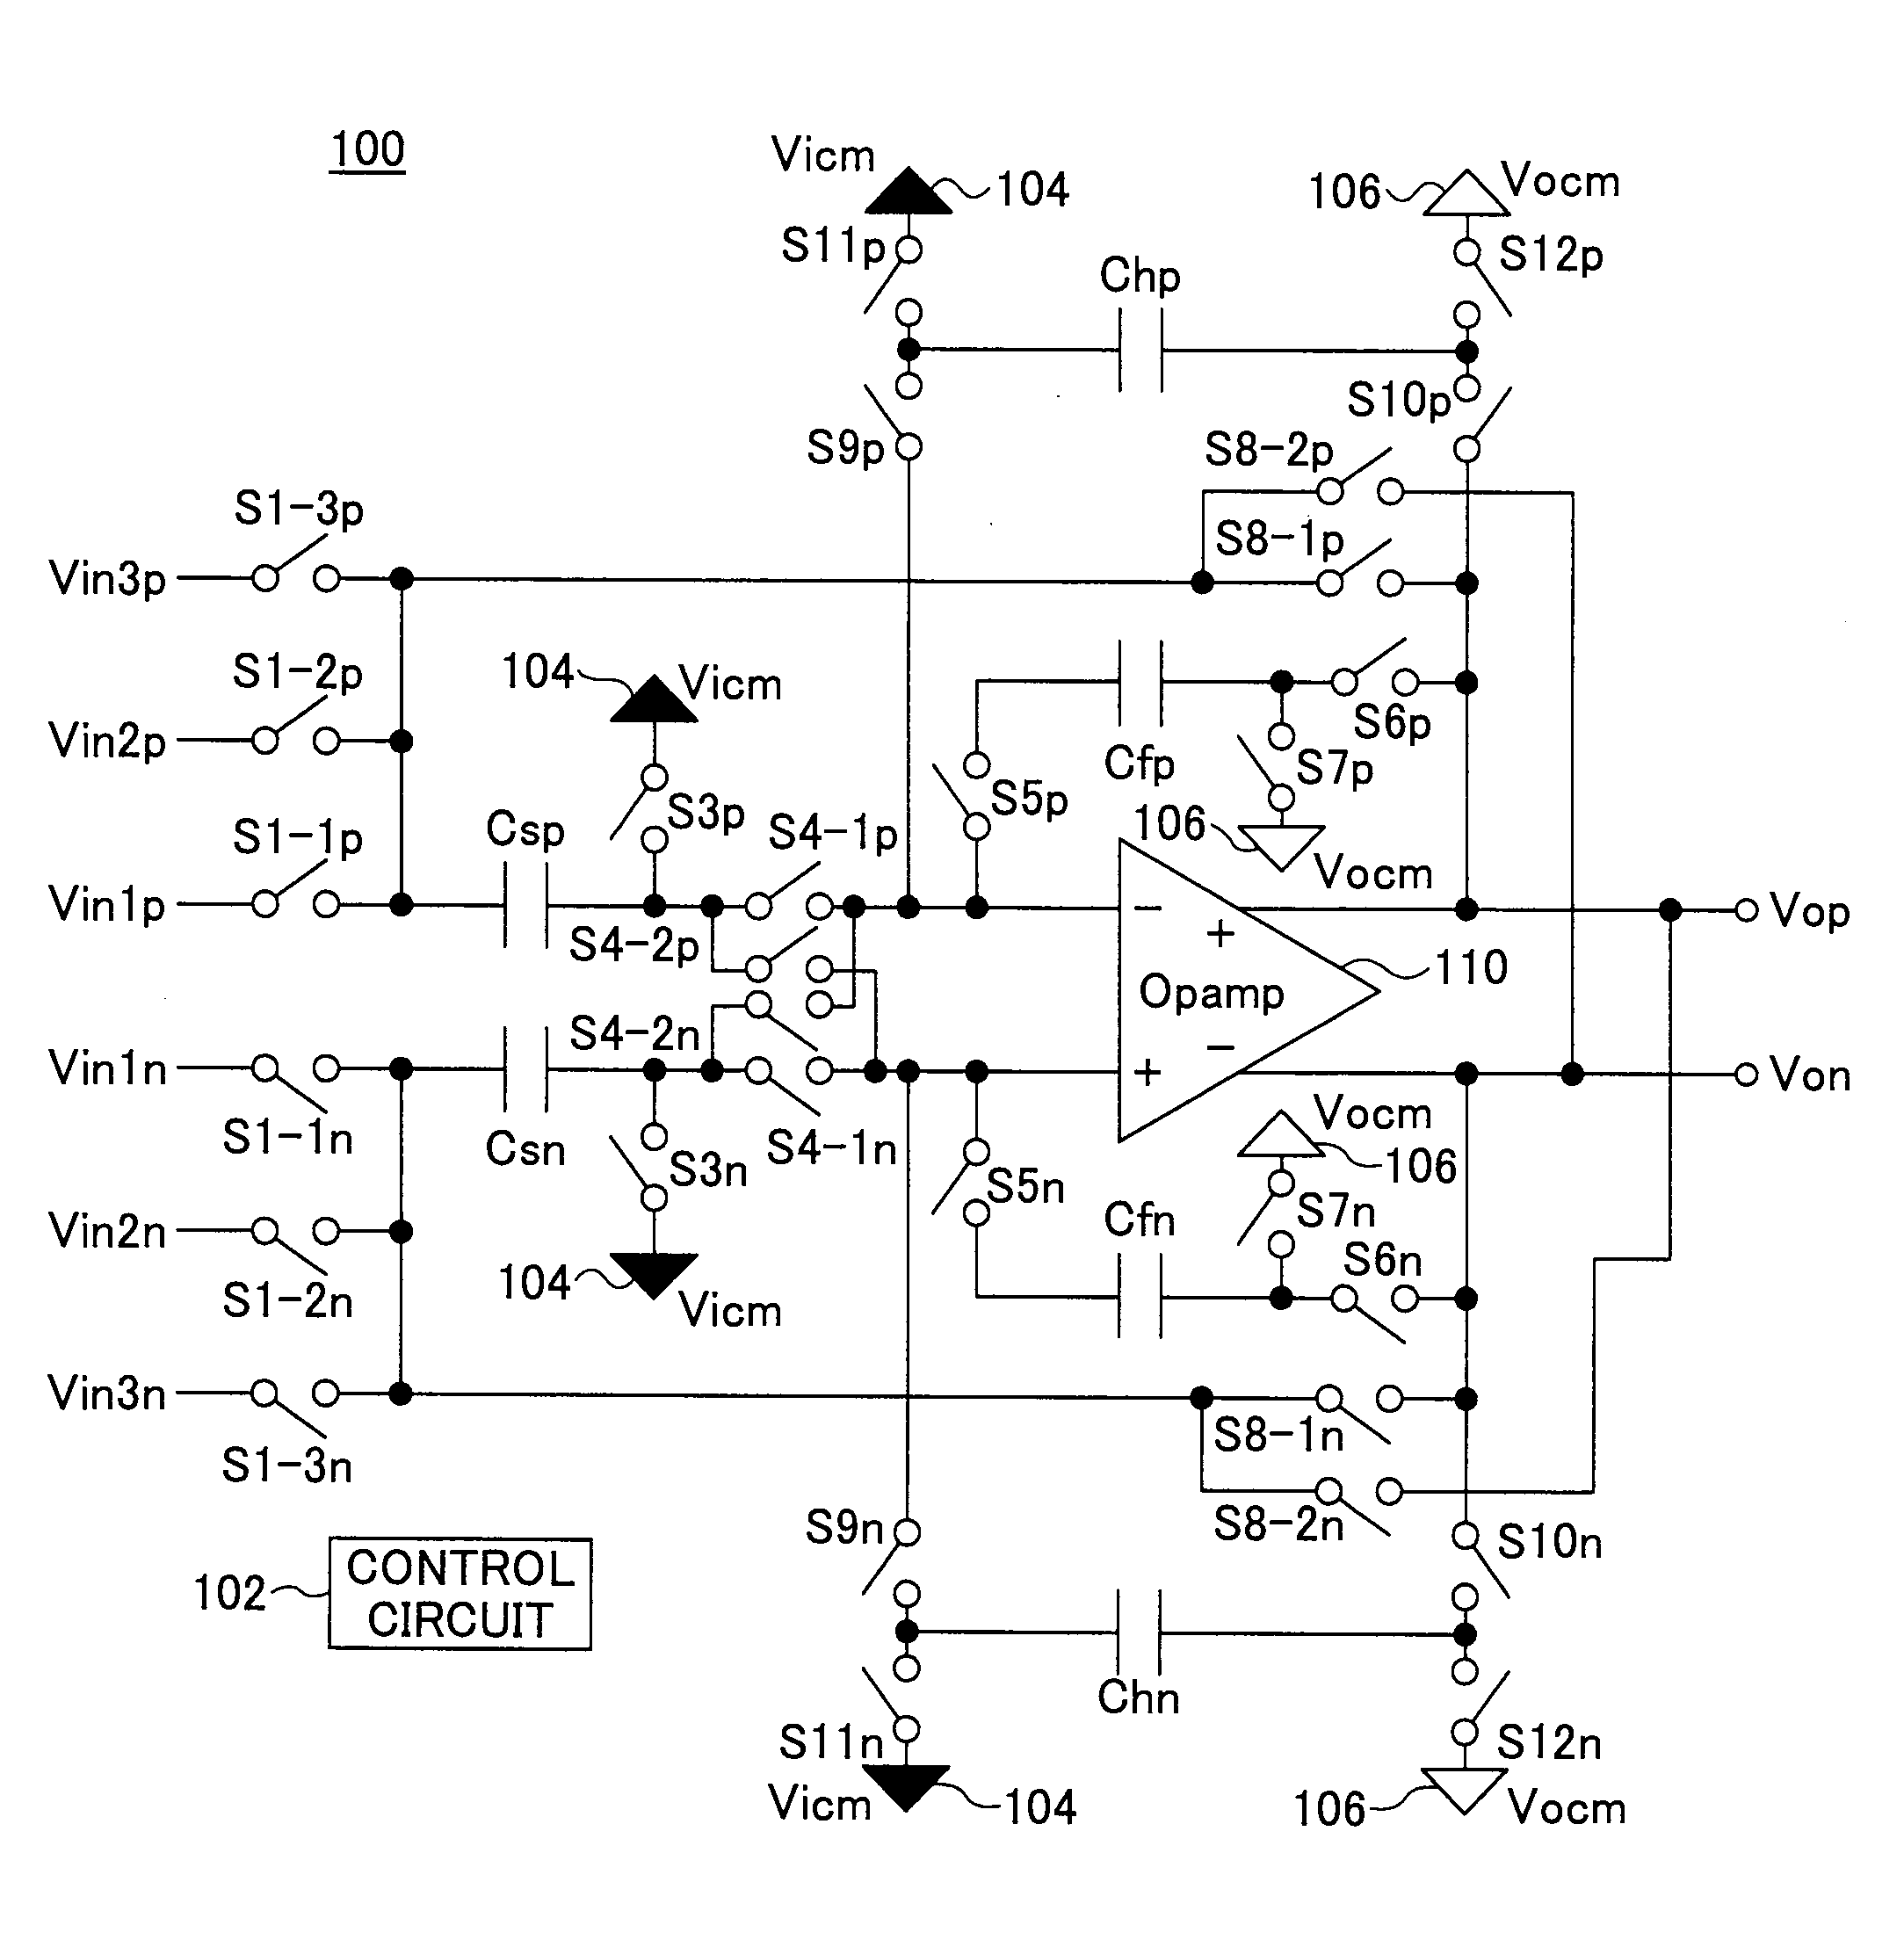 Sample and hold circuit and a/d converter apparatus